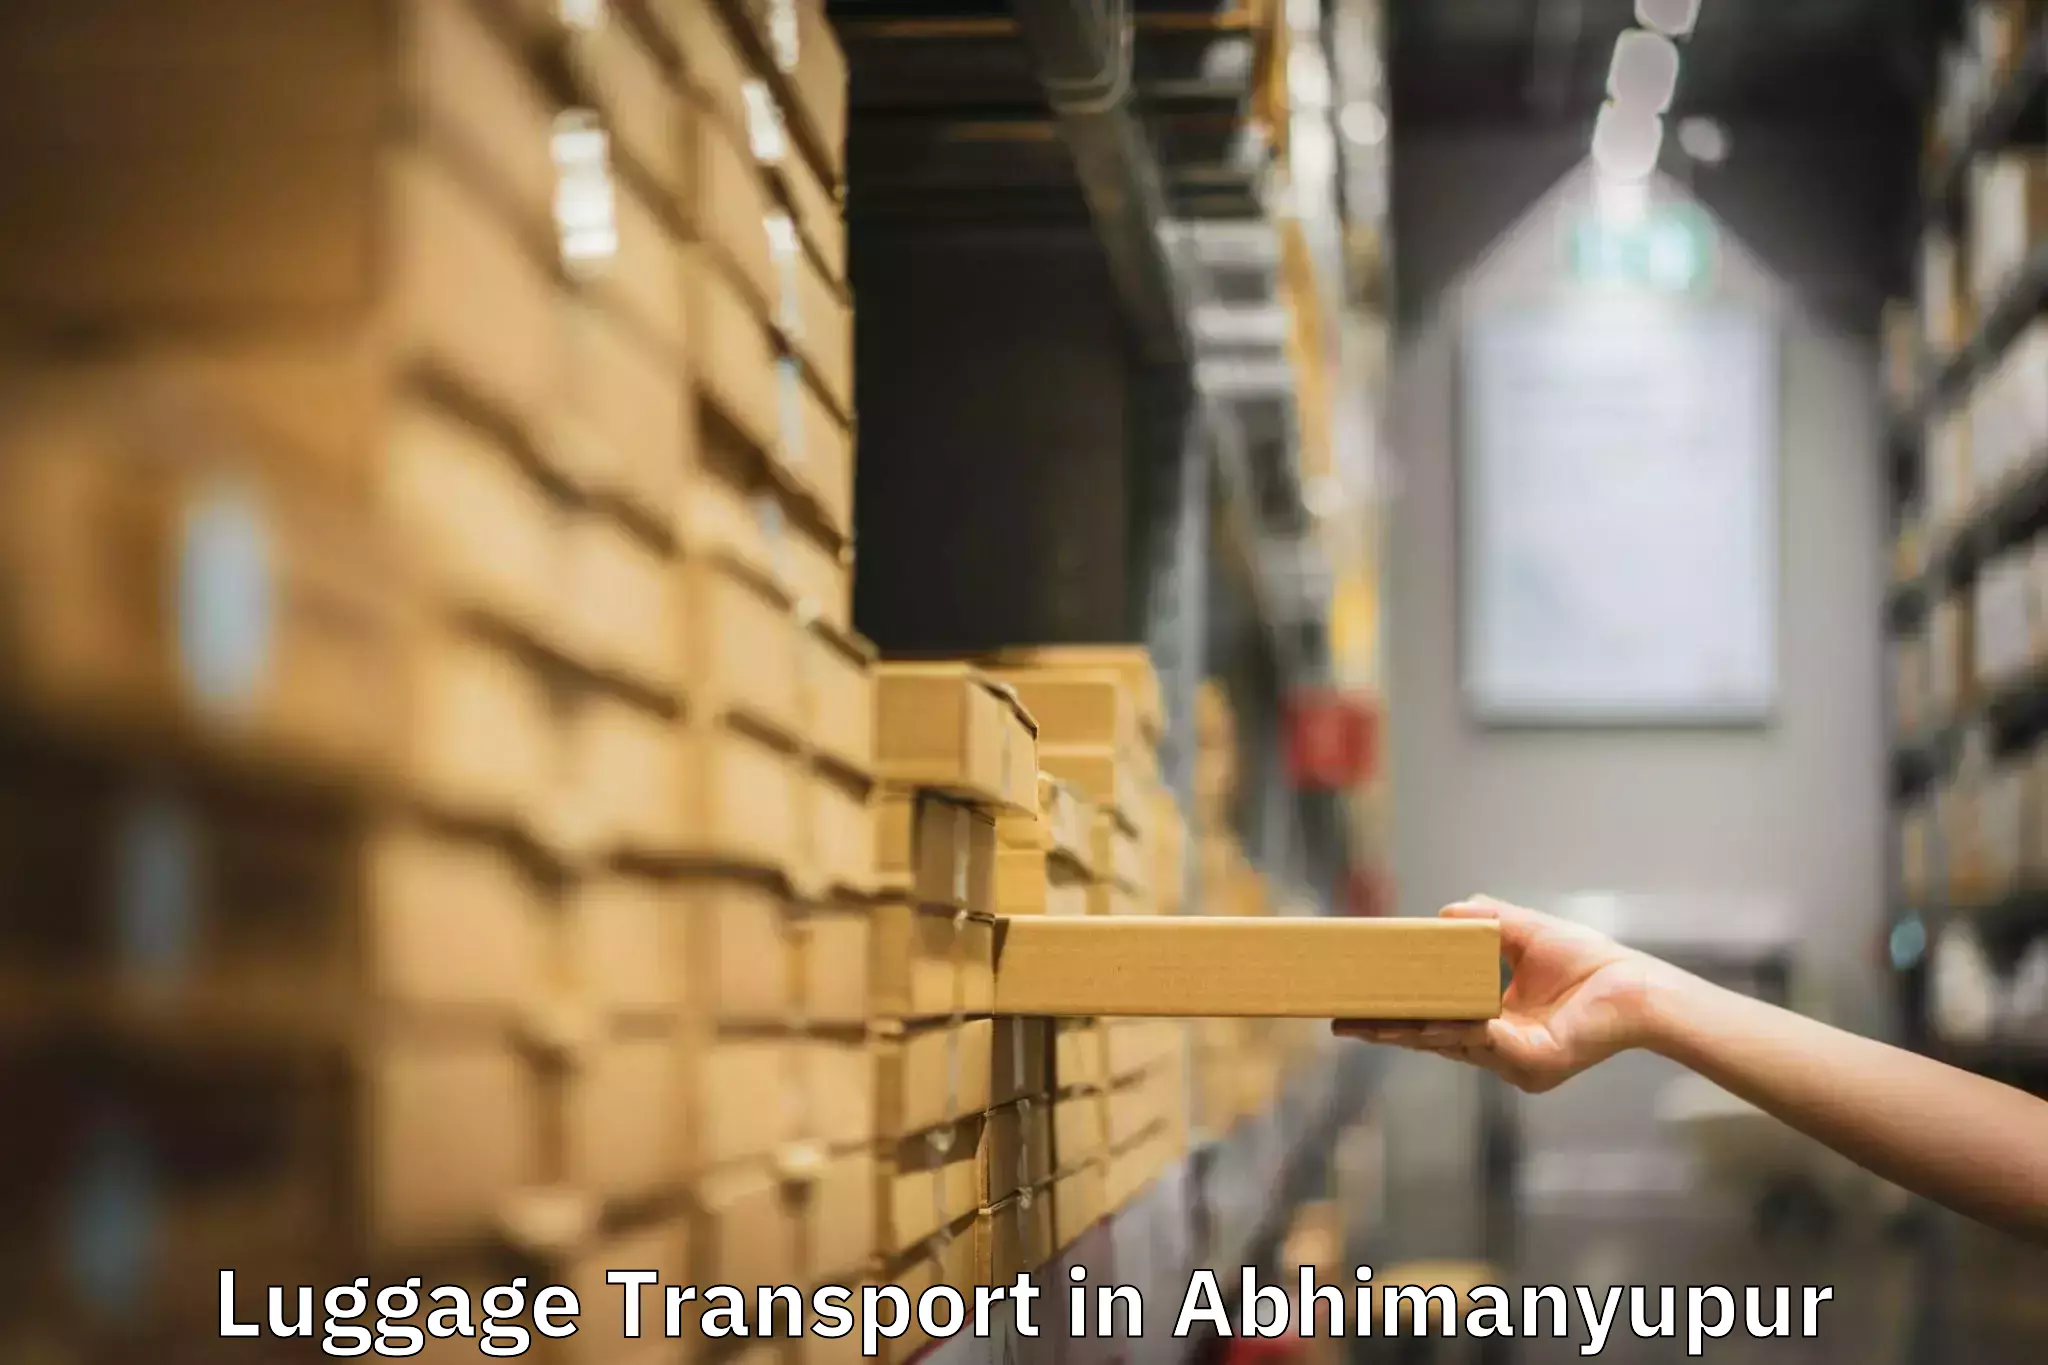 Automated luggage transport in Abhimanyupur